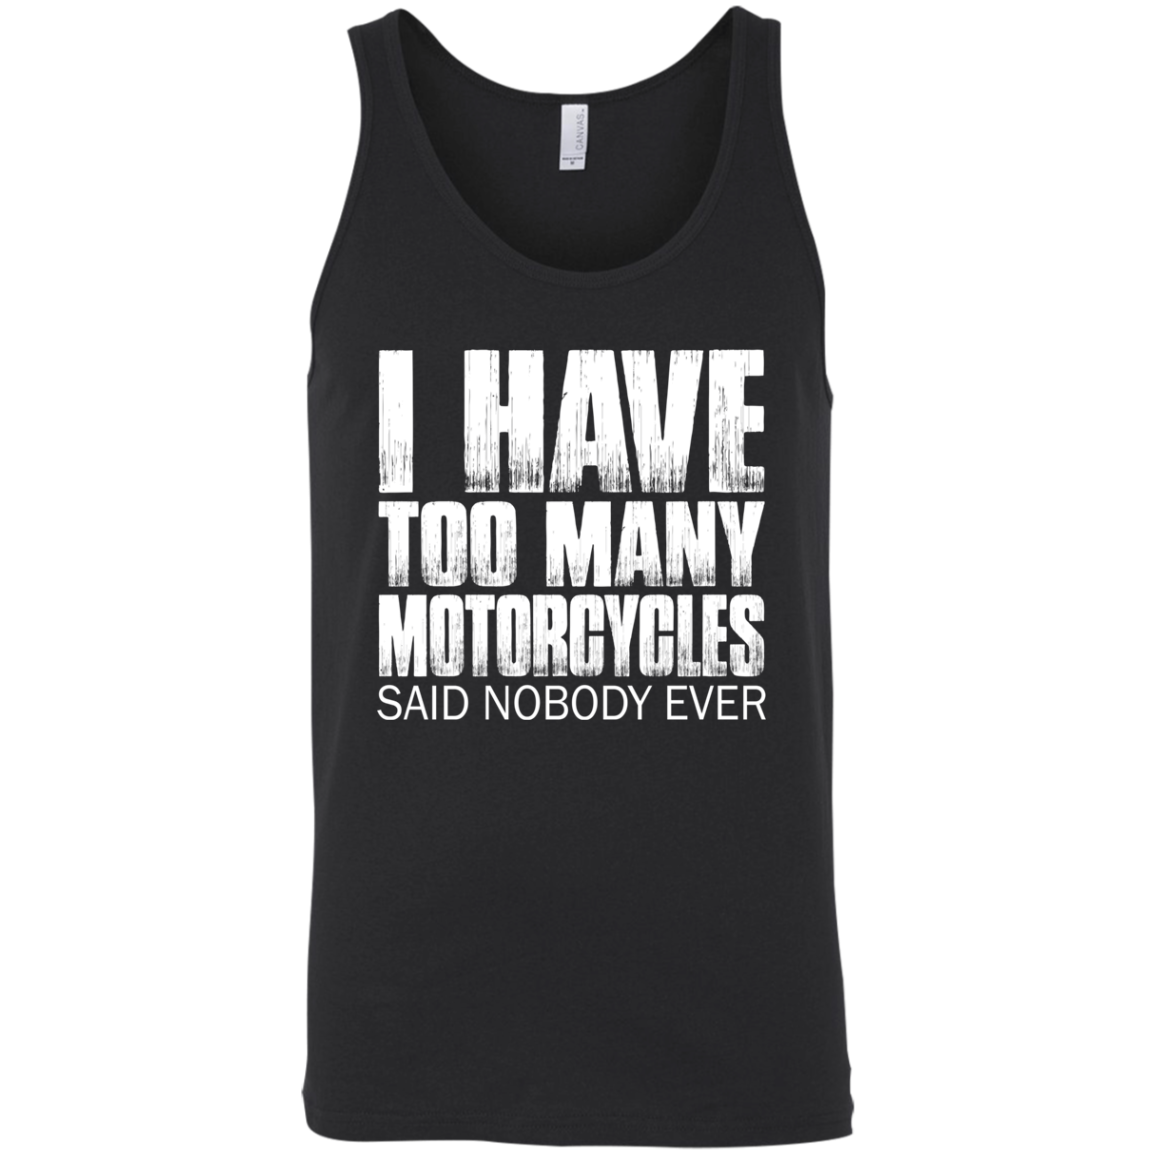  I Have Too Many Motorcycles Tank Top Black X-Small S M L XL 2XL